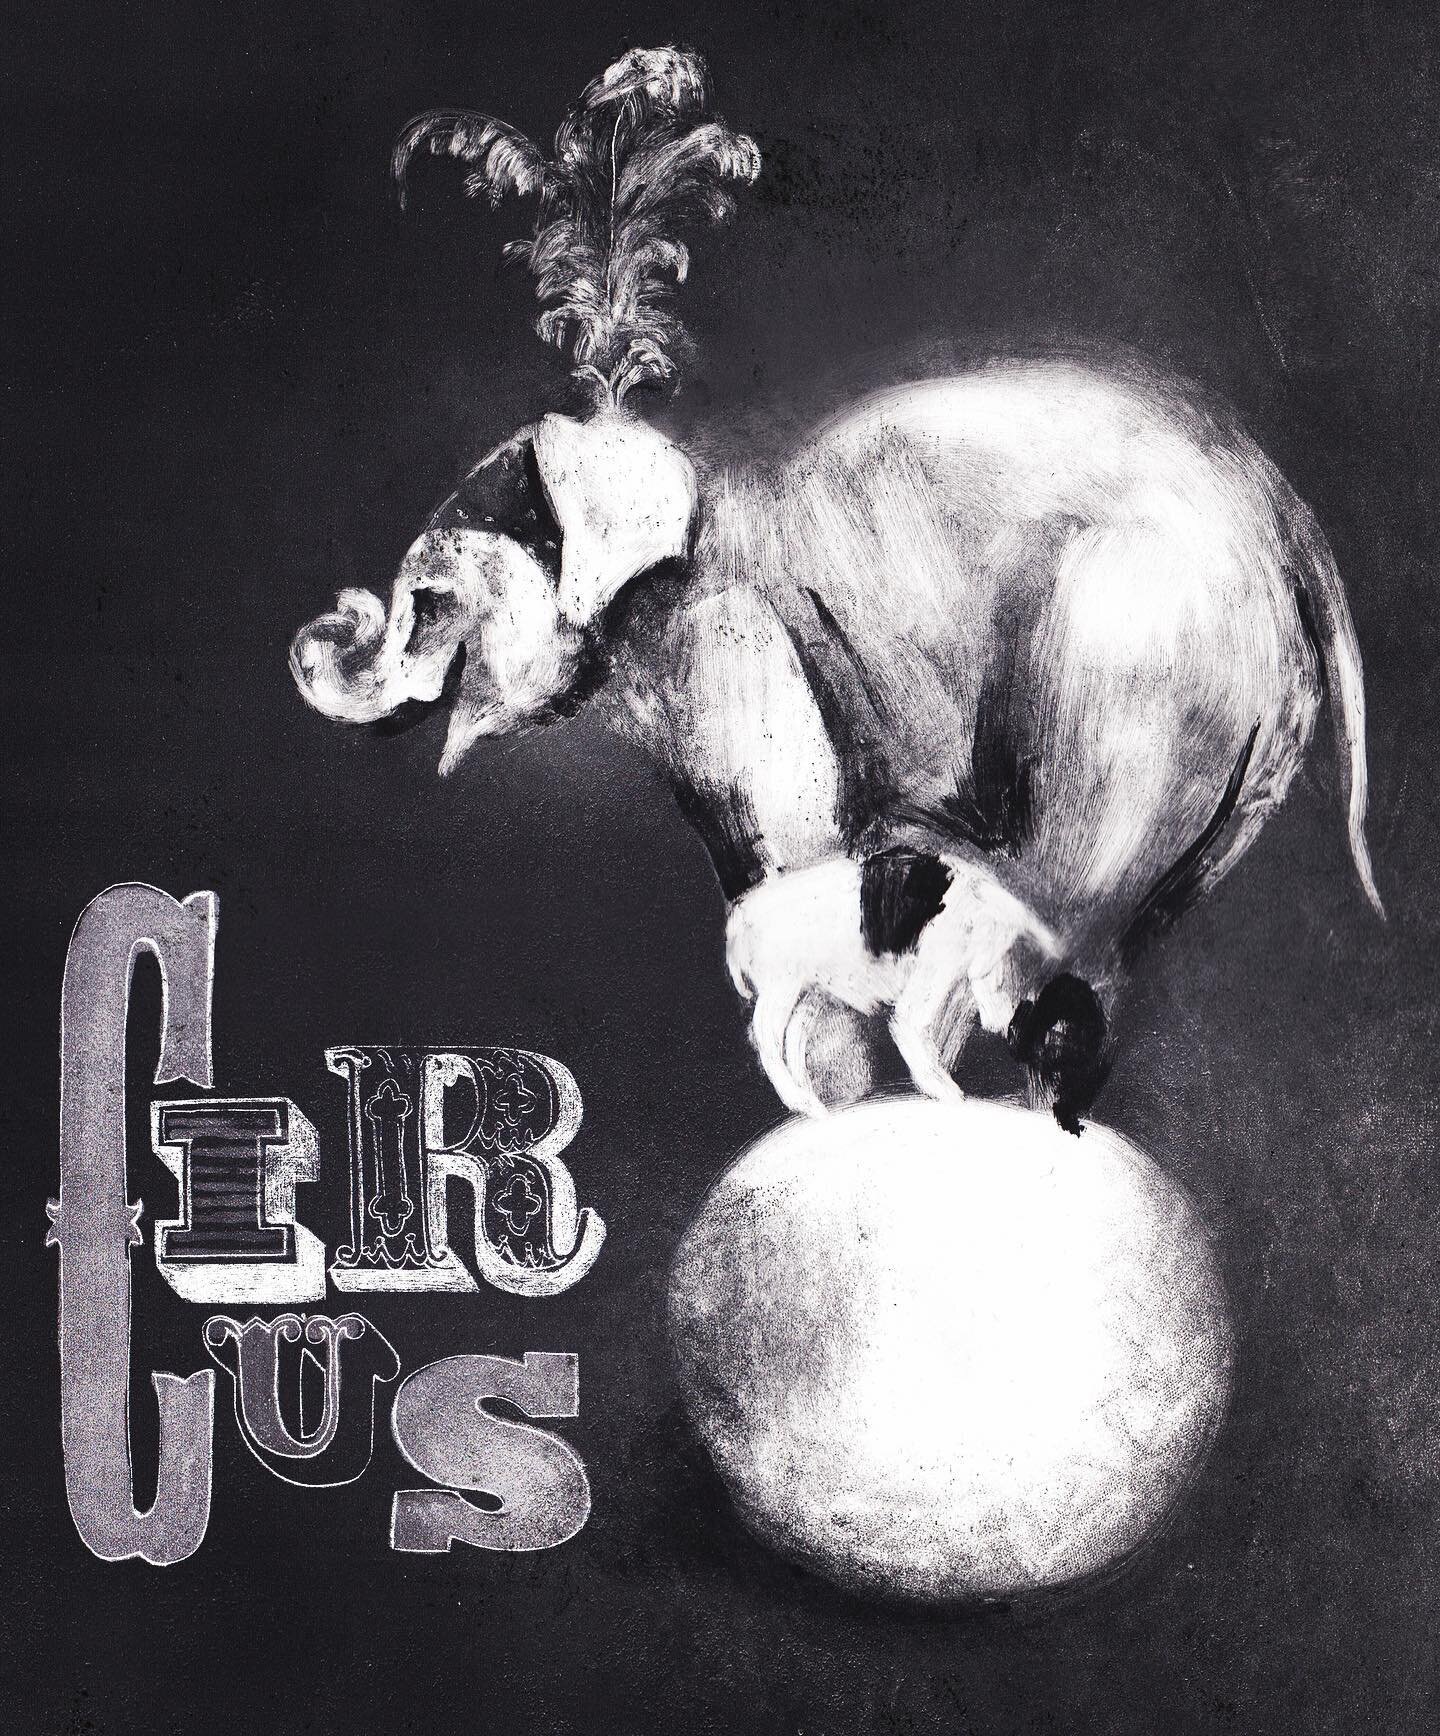 A circus poster from my MA hand in.

Development/ experiment based in a vintage circus photograph. Photographer unknown #vintagecircus #circus #elephant #dog #ball #poster #ink #print #printing #traditionalprinting #monoprint #intaglio #printingpress